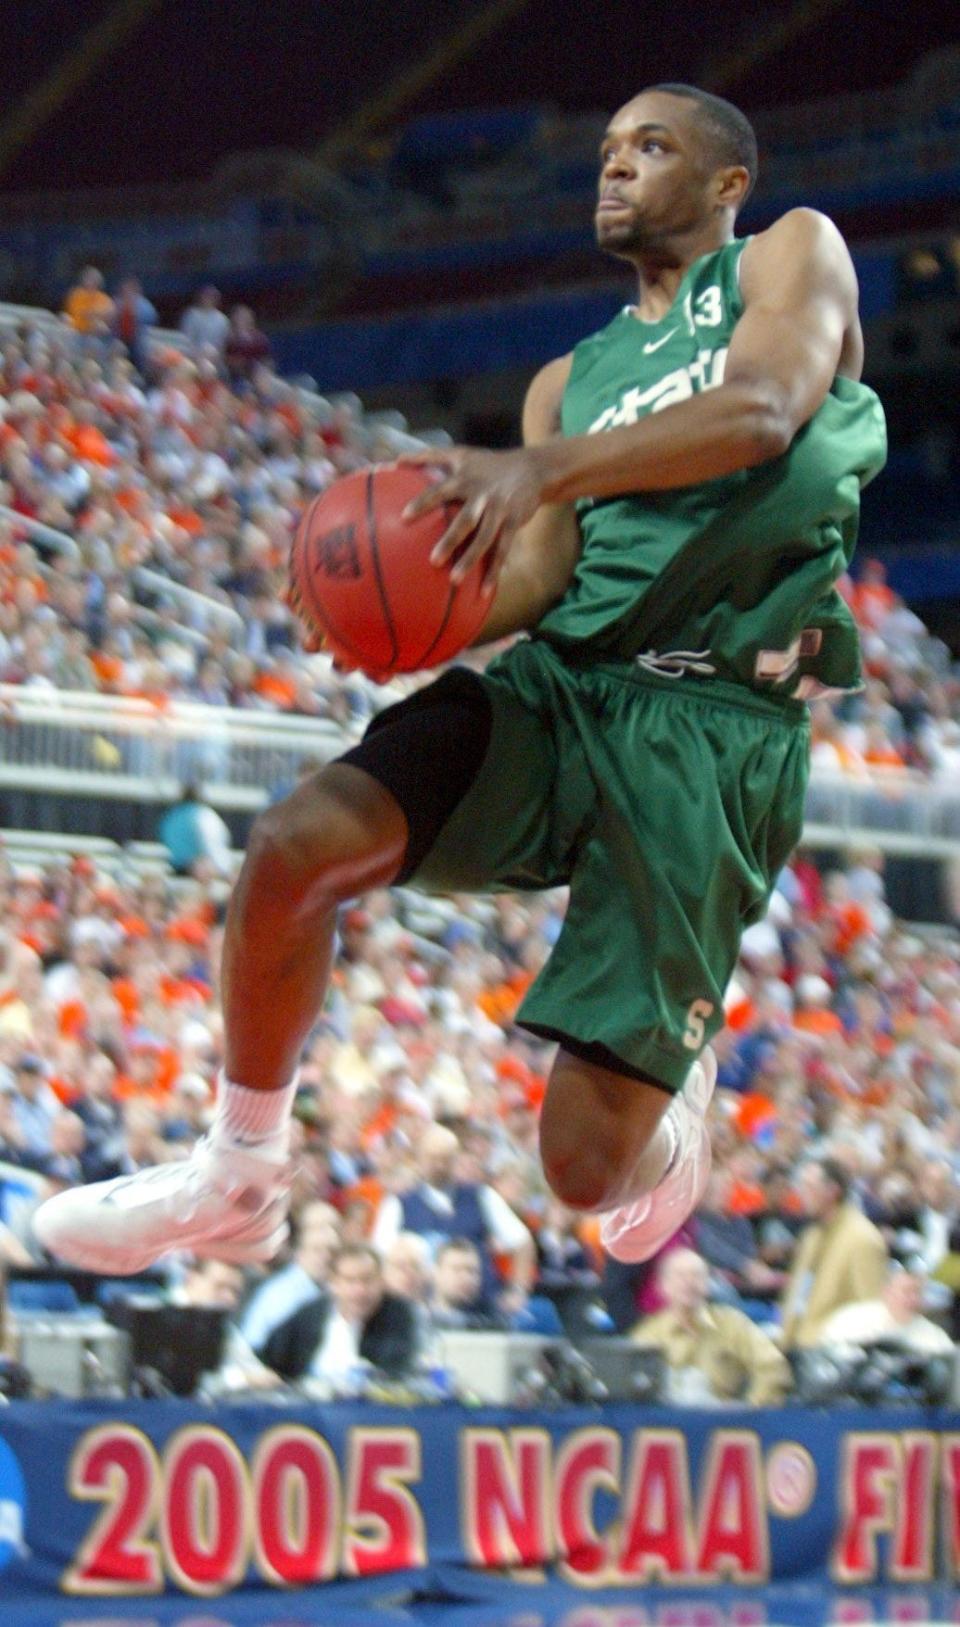 Michigan State's Maurice Ager, (13), flys to the hoop during practice at the 2005 NCAA Division 1 Men's Basketball Final Four Championships, Friday April 1, 2005, at the Edward Jones Dome in St Louis, Missouri. DAVID P. GILKEY/Detroit Free Press